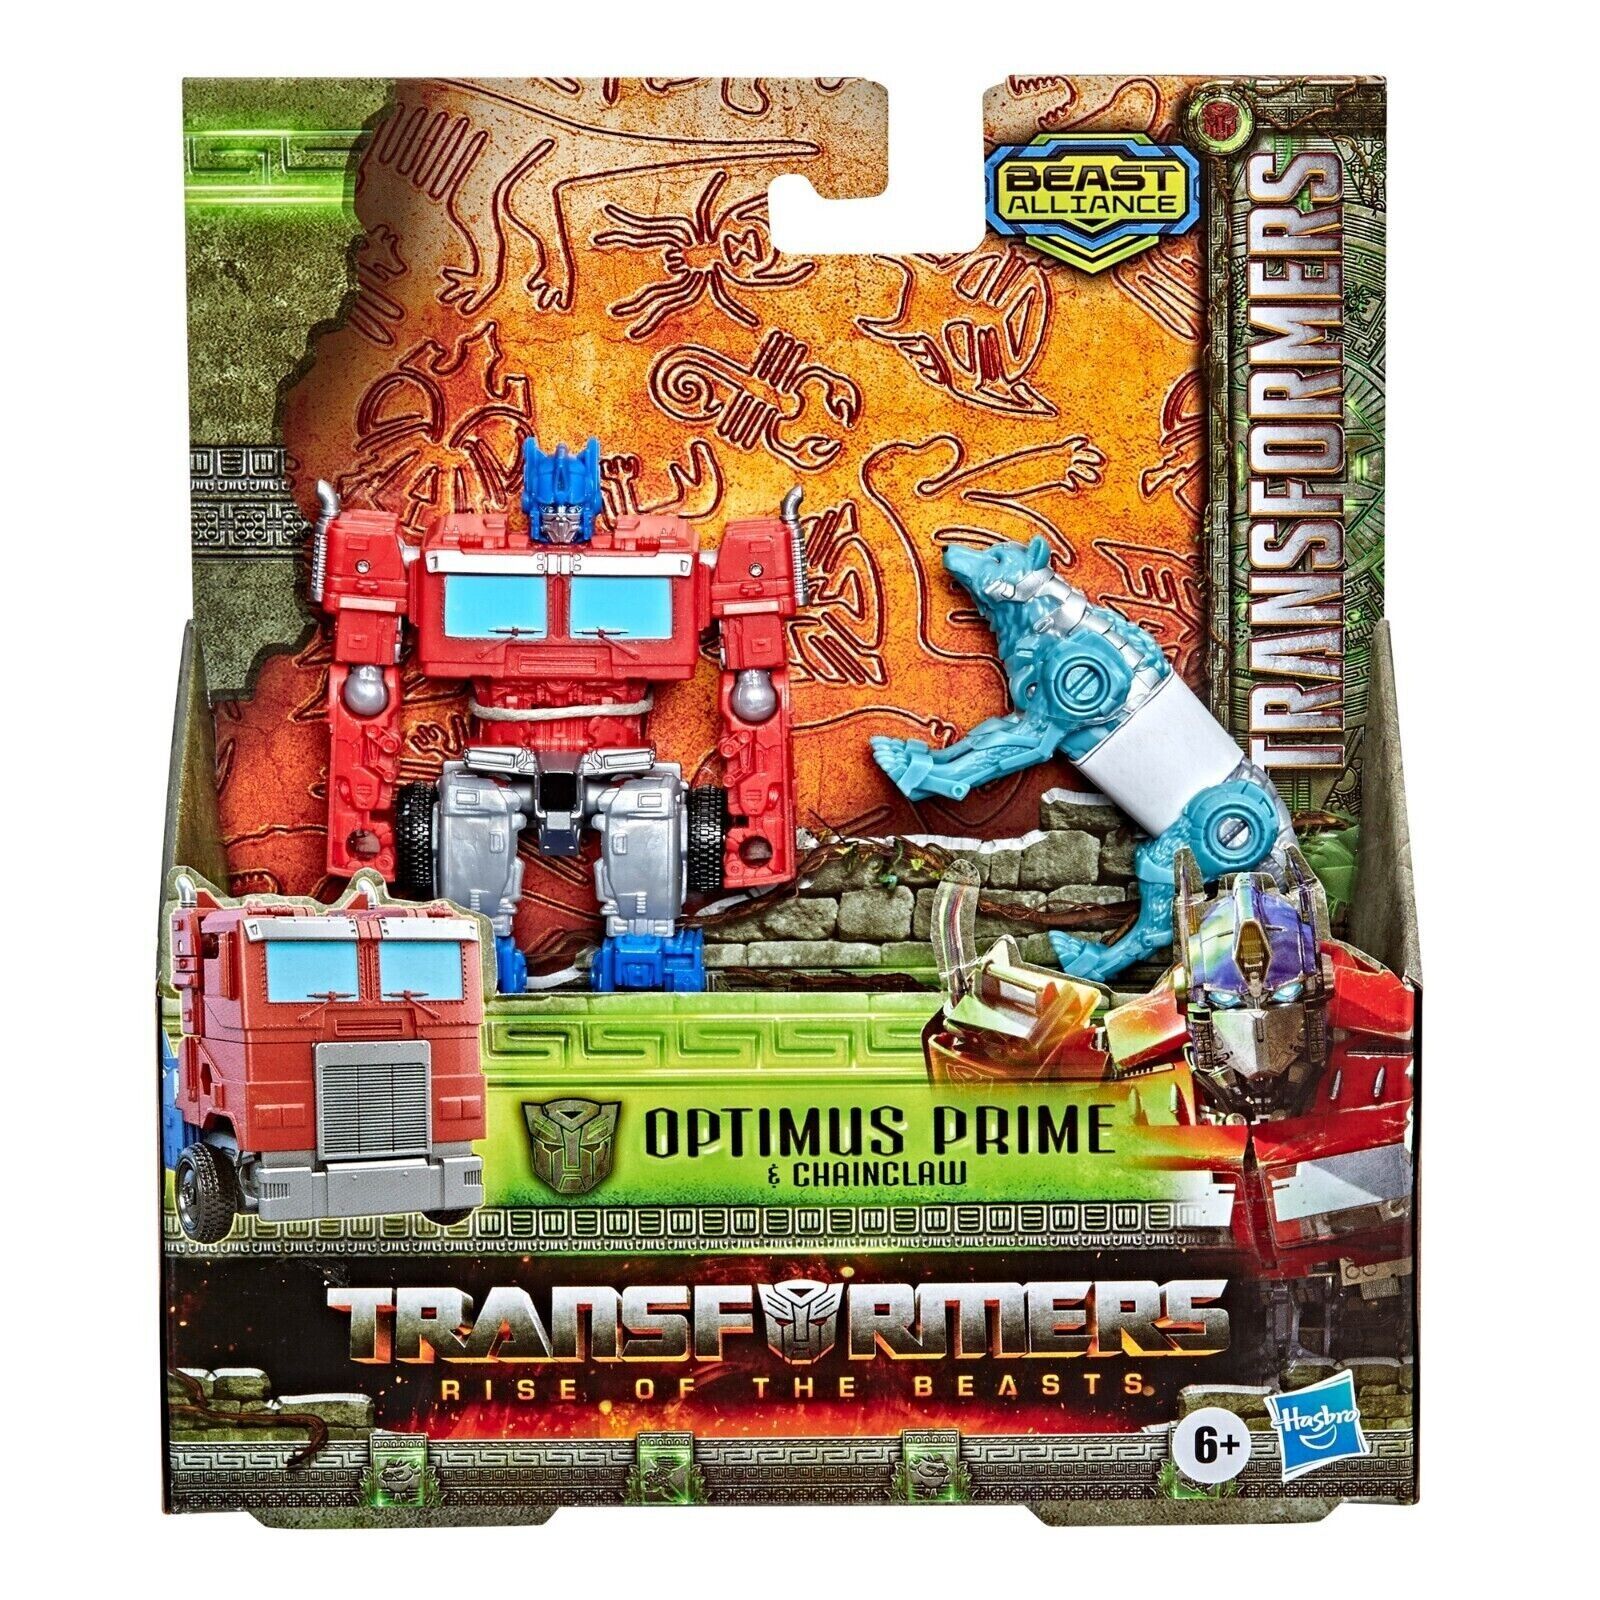 Transformers Rise of the Beasts 2-Pack Figure Playset - New in Box!